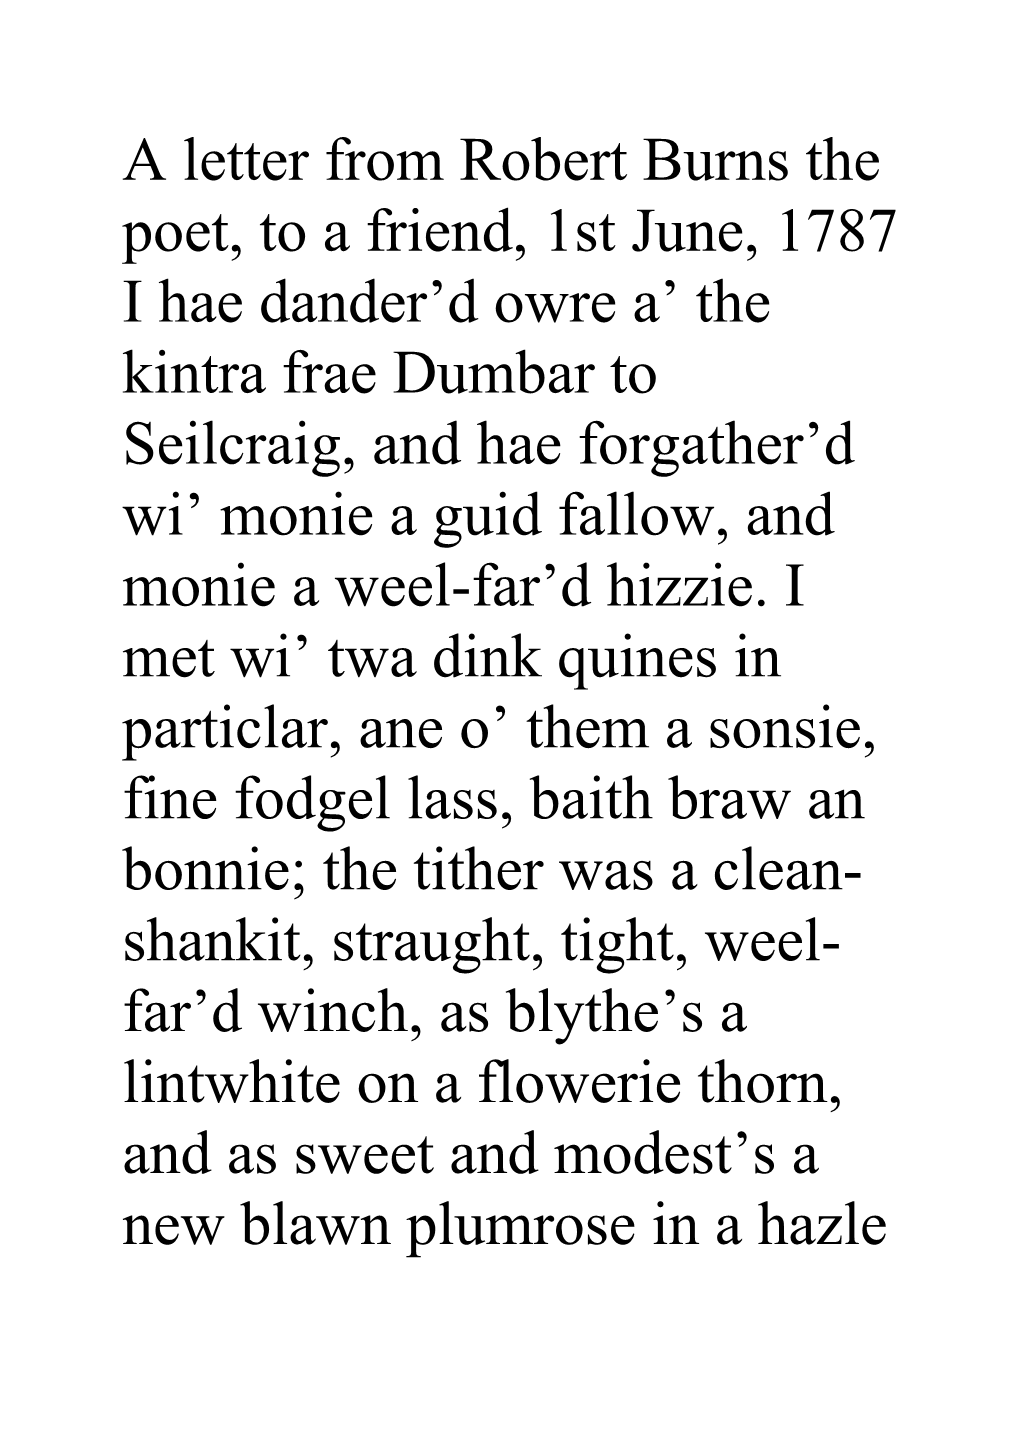 A Letter from Robert Burns the Poet, to a Friend, 1St June, 1787